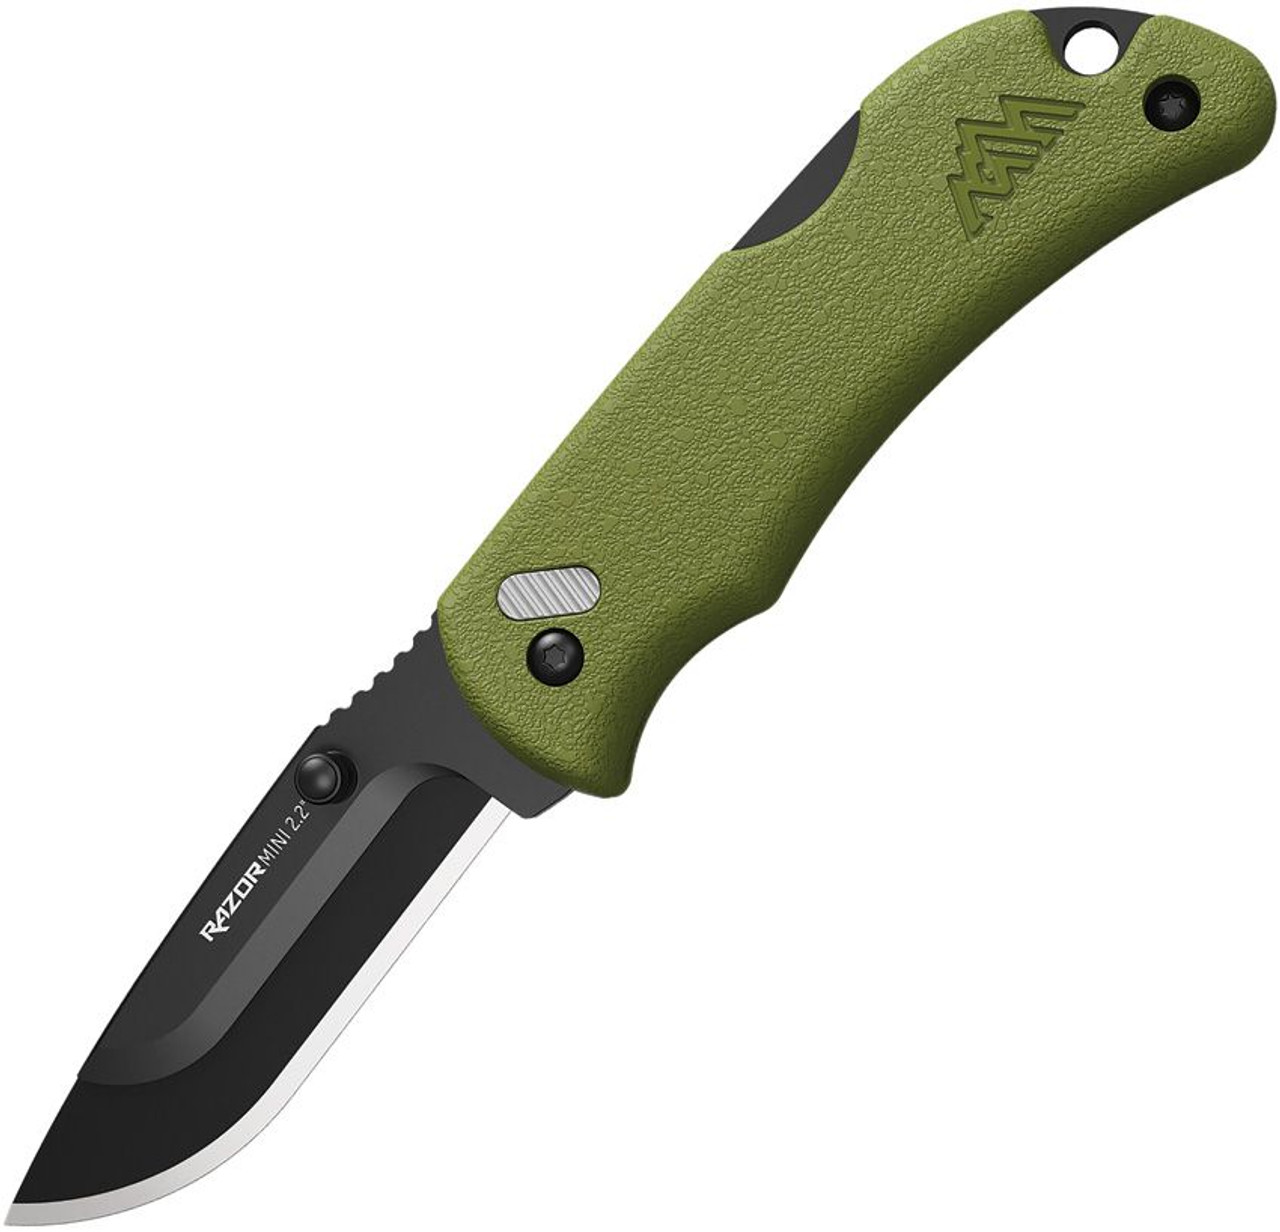 Outdoor Edge Razor Mini (RMG22-2C) 2.2" Japanese 420J2 Stainless Steel Replaceable Drop Point Plain Razor Blade, Olive Drab Green ABS Handle